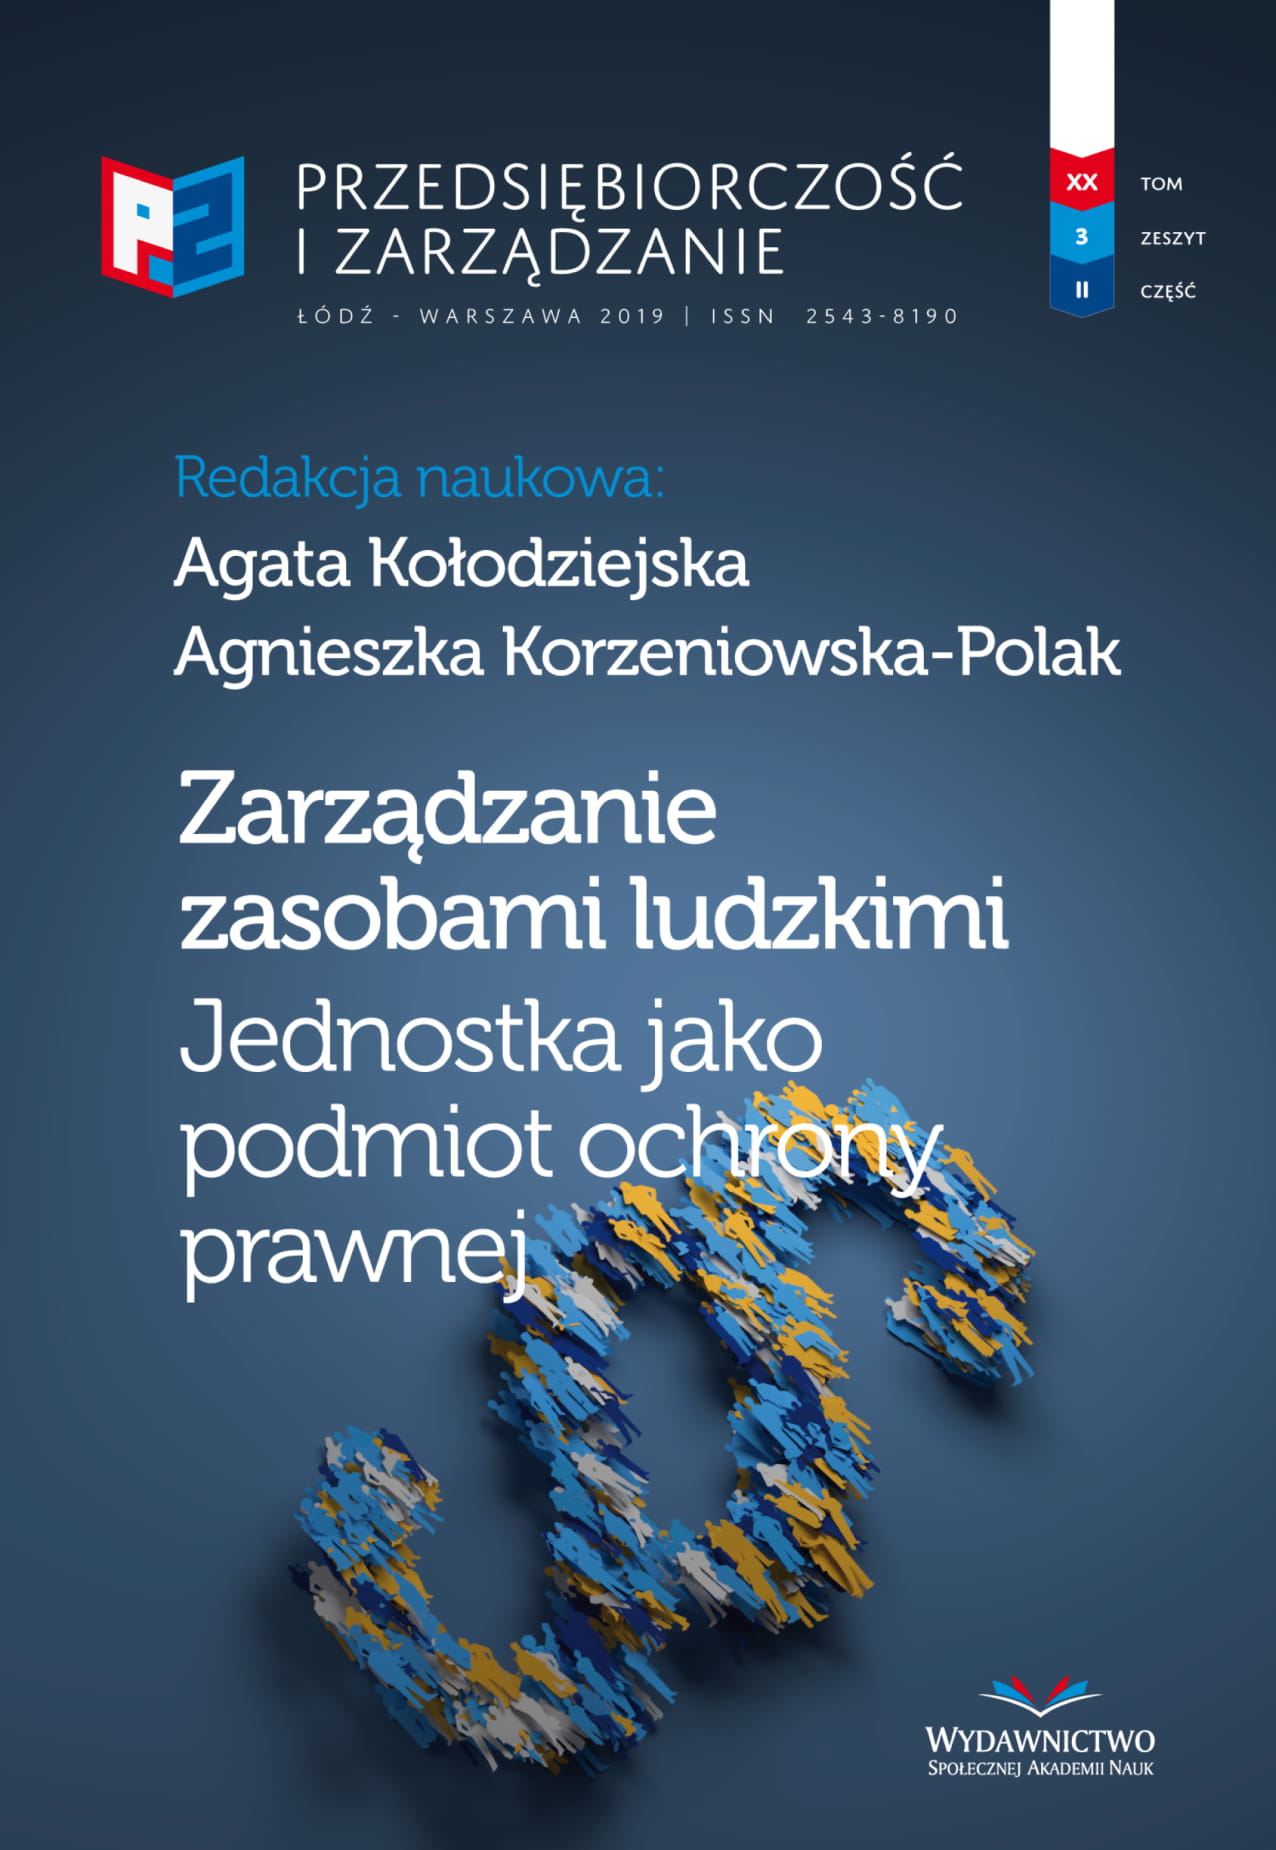 Determinants Vocational Activity and Civic Activity
of the People with Disabilities in Poland Cover Image